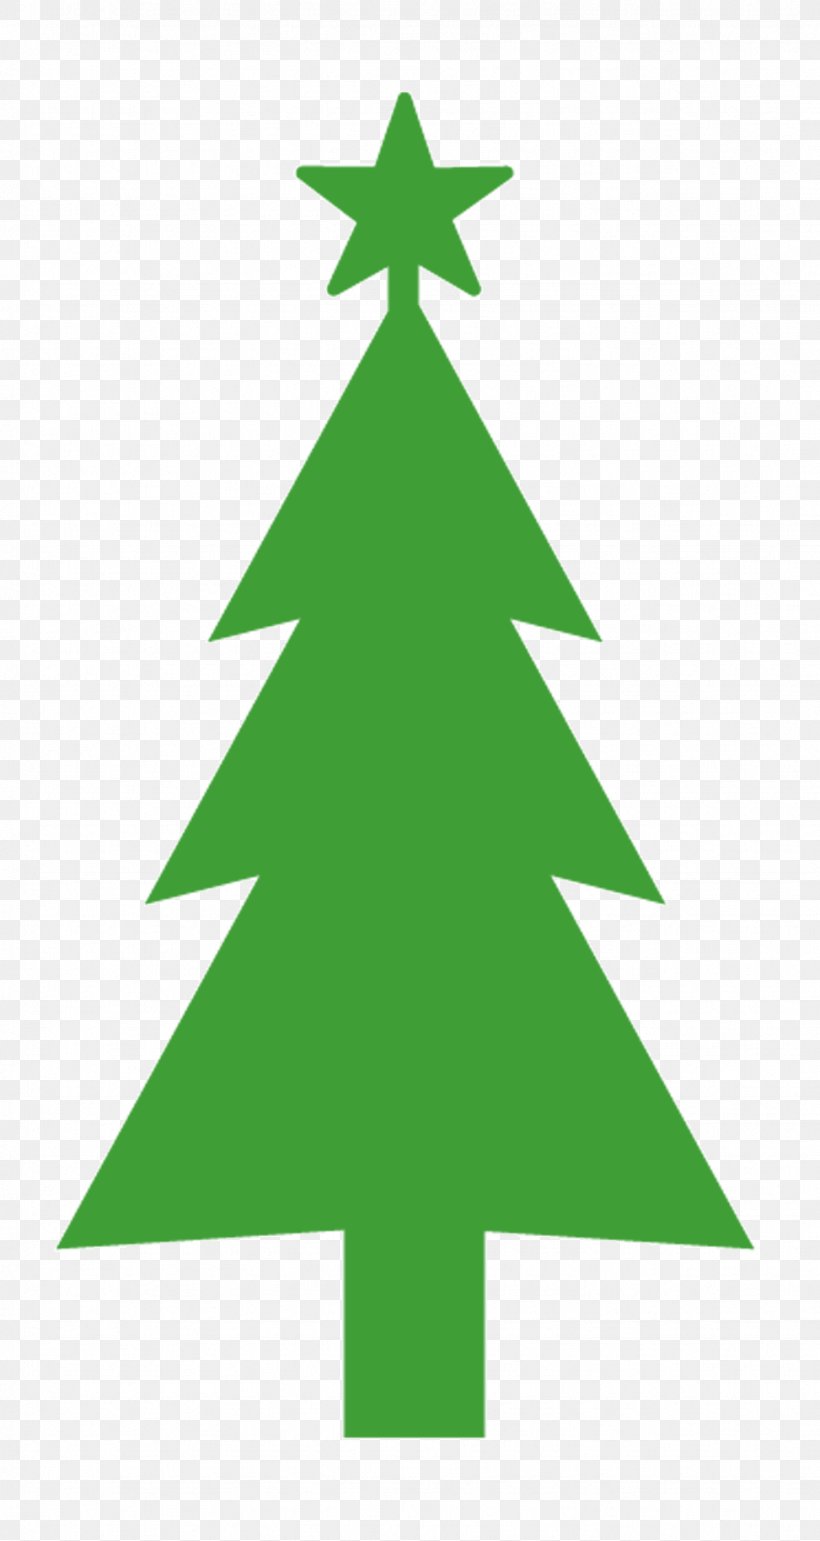 Christmas Tree Evergreen Pine Clip Art, PNG, 973x1829px, Christmas Tree, Christmas, Christmas Decoration, Christmas Gift, Christmas Music Download Free